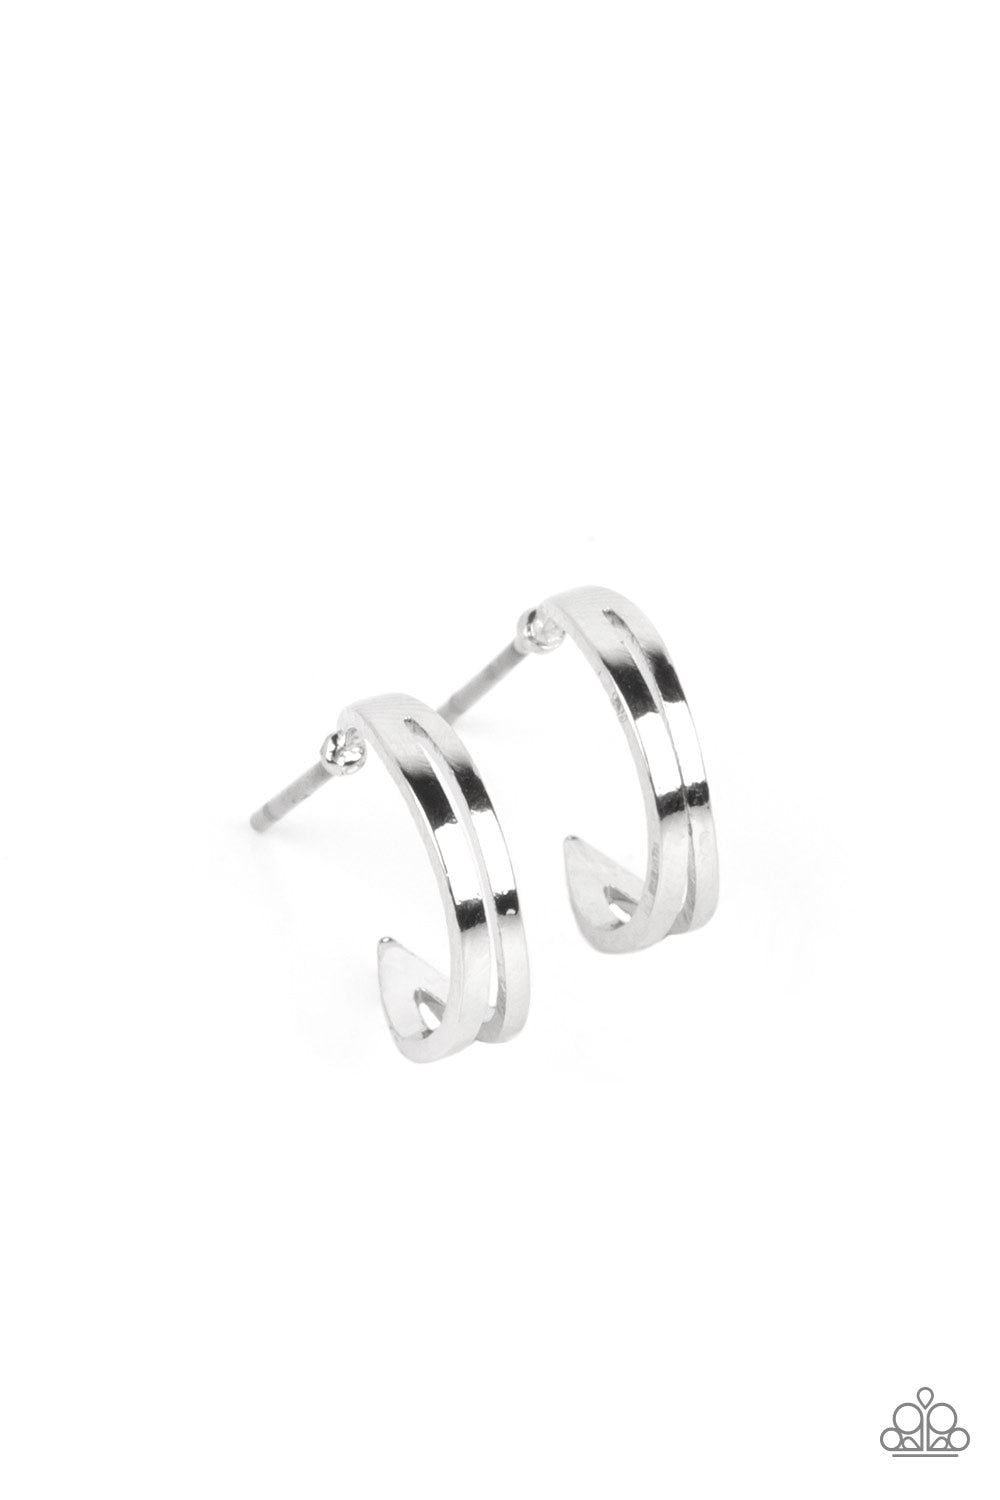 SMALLEST of Them All Silver Hoop Earring - Paparazzi Accessories  Two flat silver bars delicately curve into a single hoop, creating a dainty layered look. Earring attaches to a standard post fitting. Hoop measures approximately 1/2" in diameter.  Sold as one pair of hoop earrings.